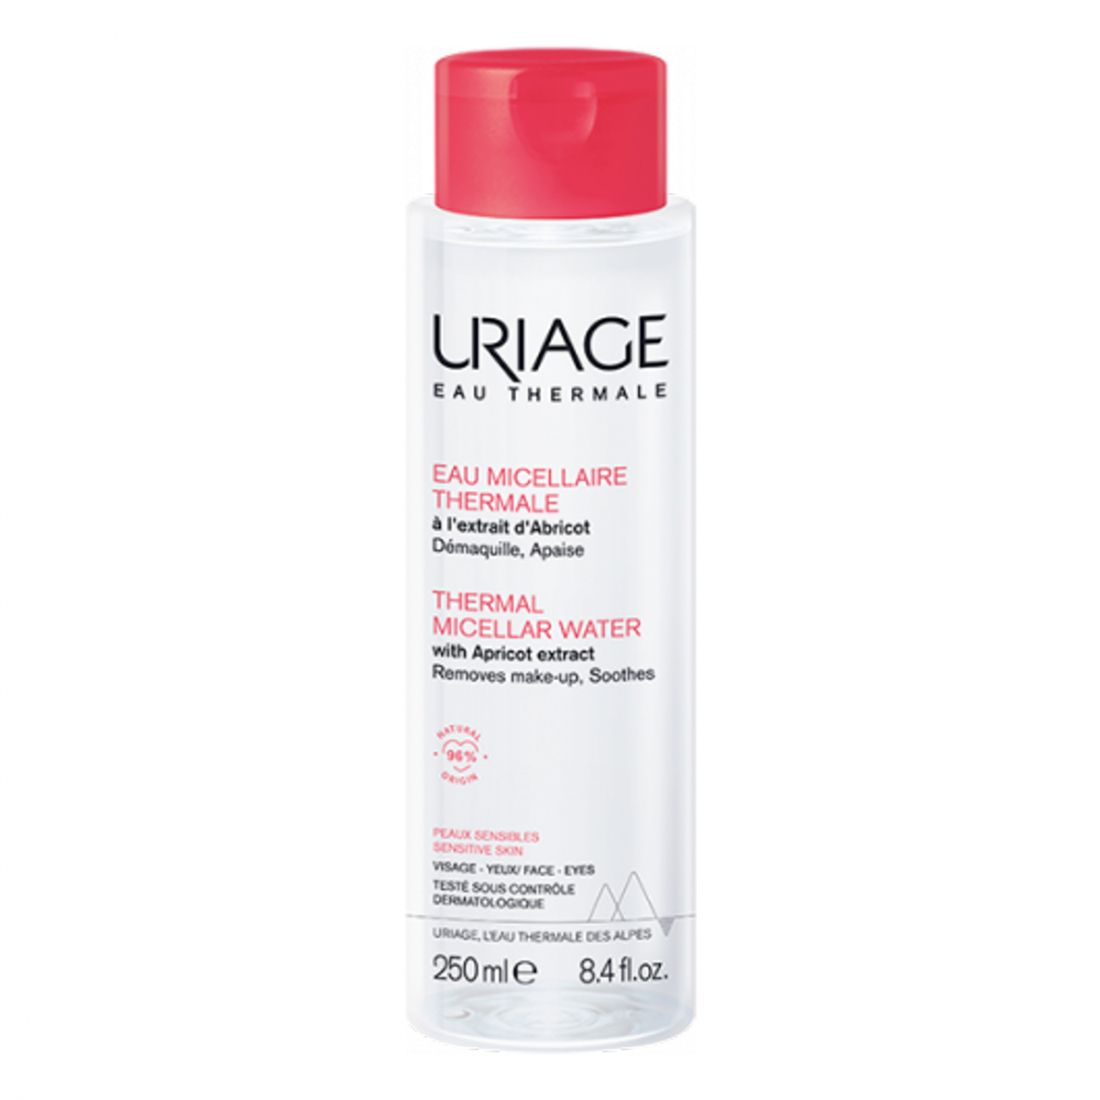 Uriage - Eau micellaire 'Thermale' - 250 ml